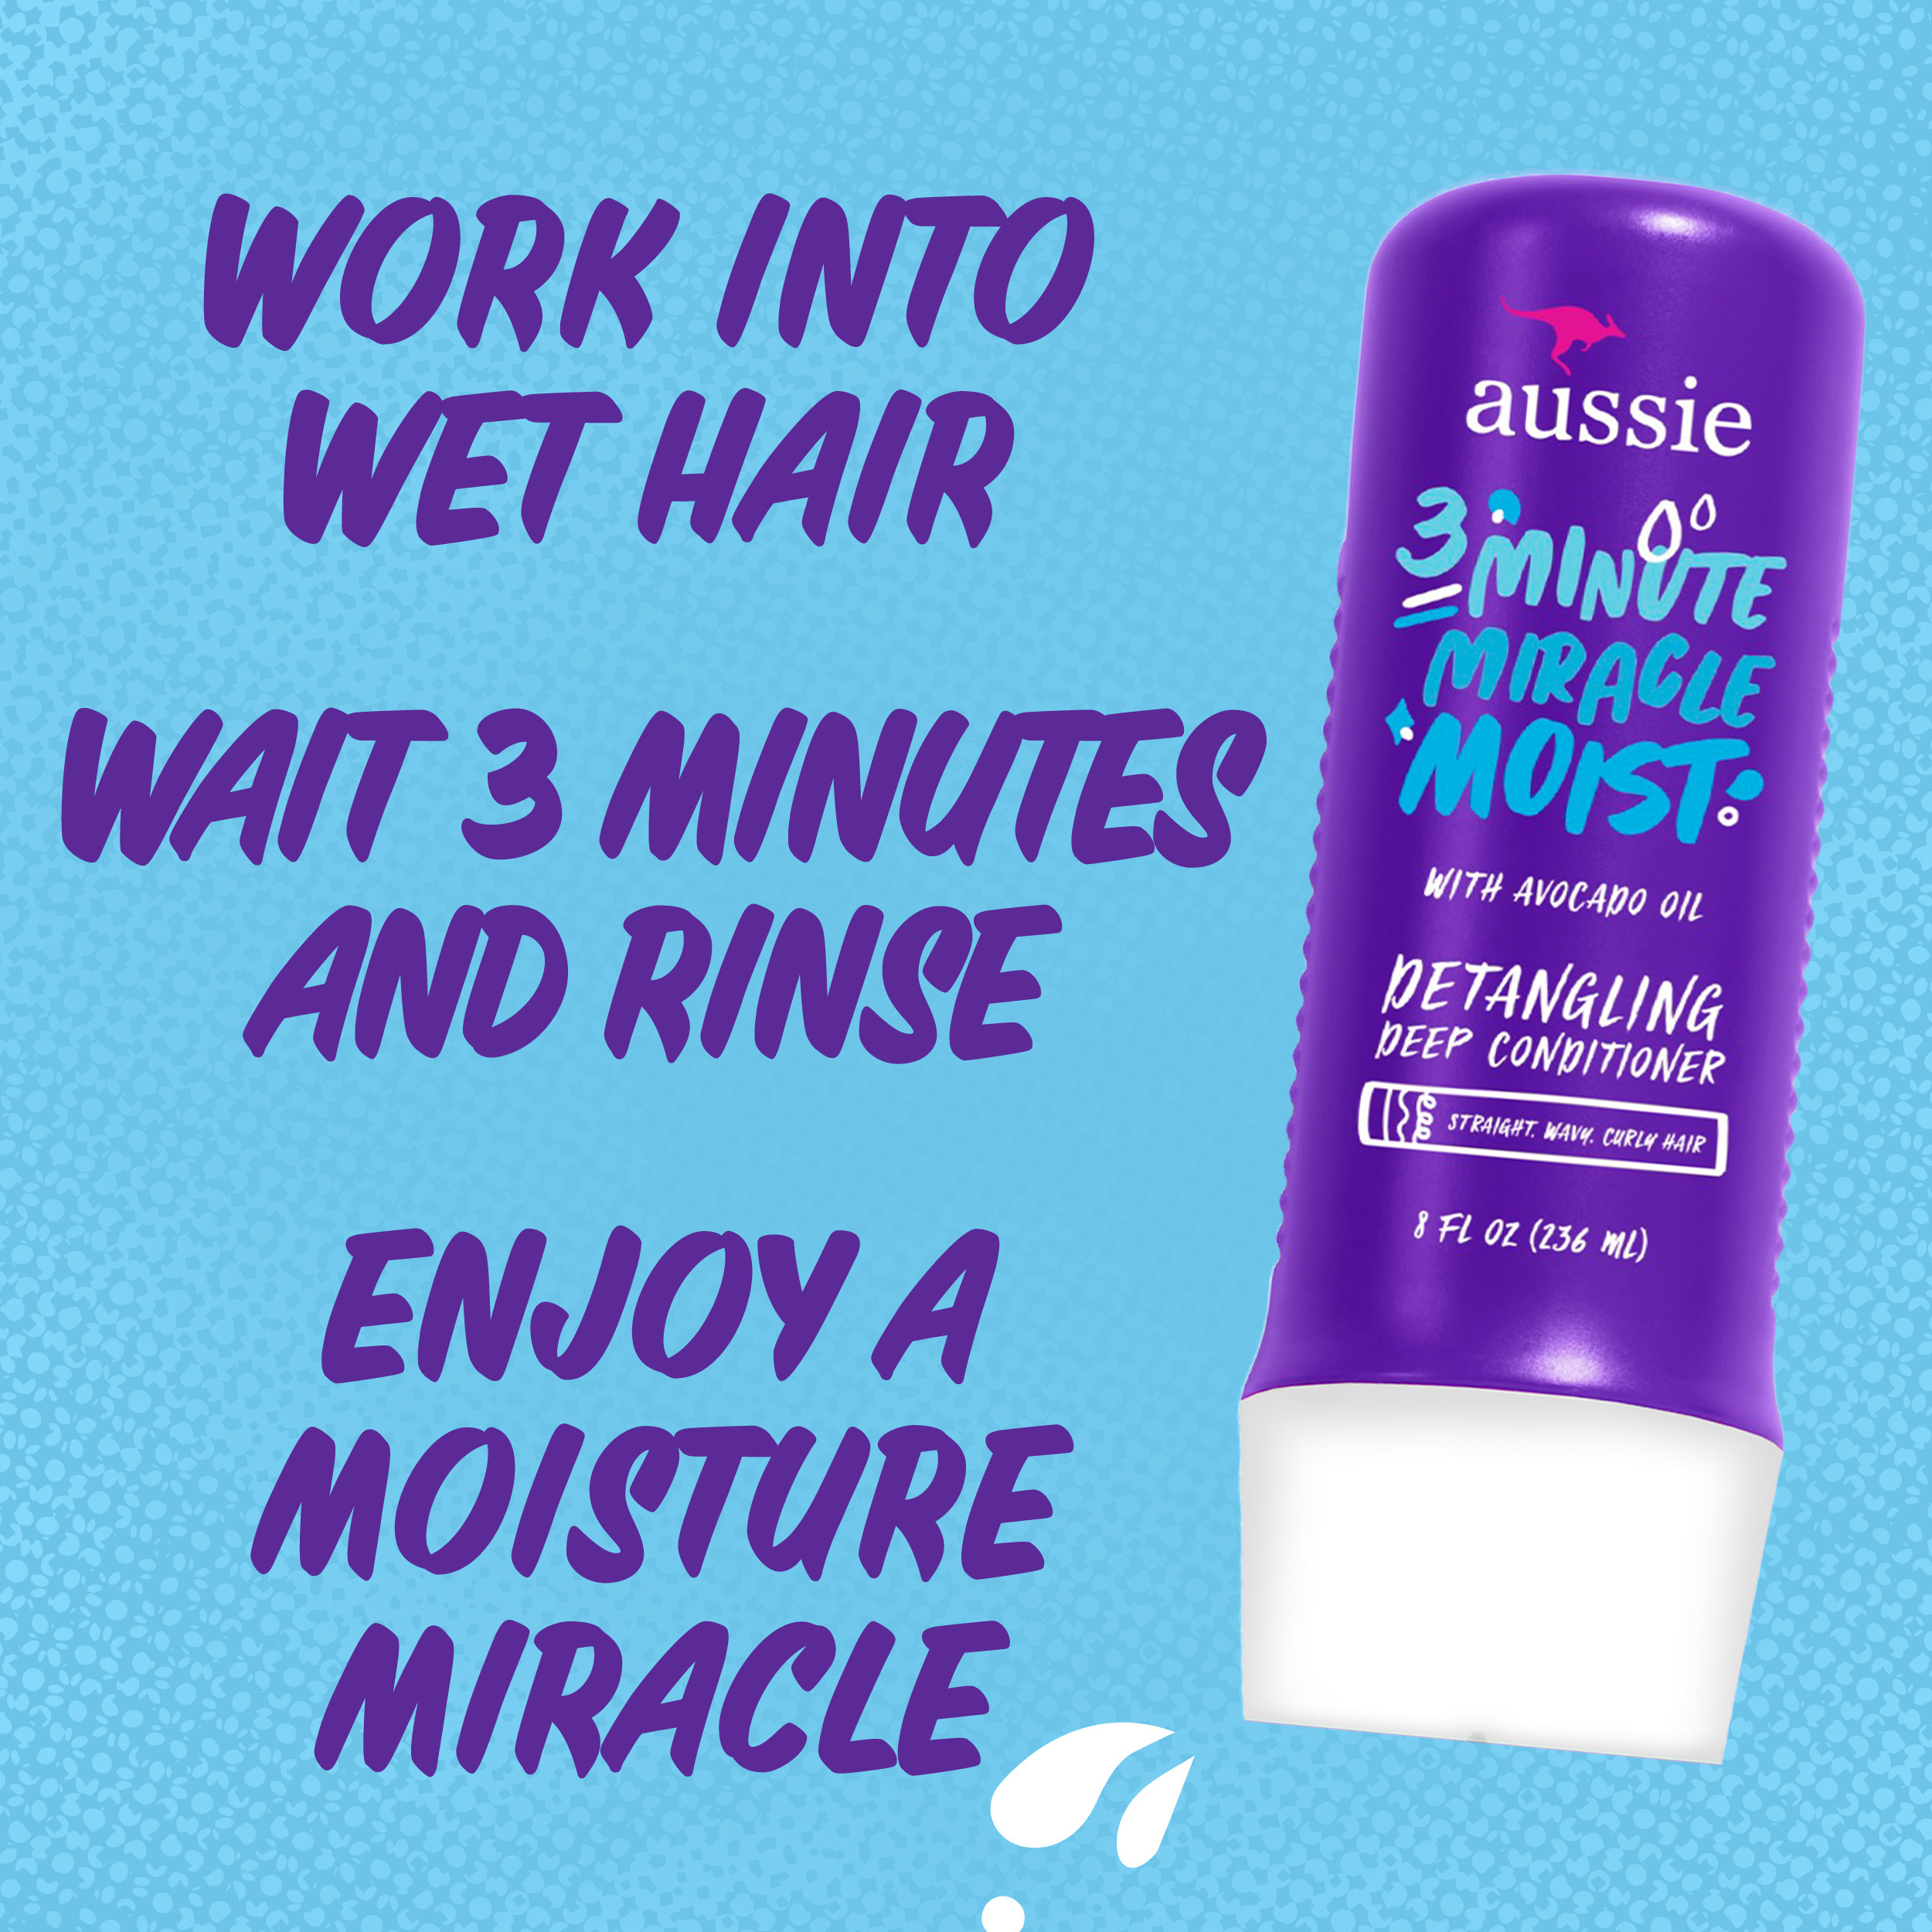 Aussie 3 Minute Miracle Moist Conditioner, Paraben Free, Twin Pk, 8.0 fl oz. for All Hair Types - image 4 of 12